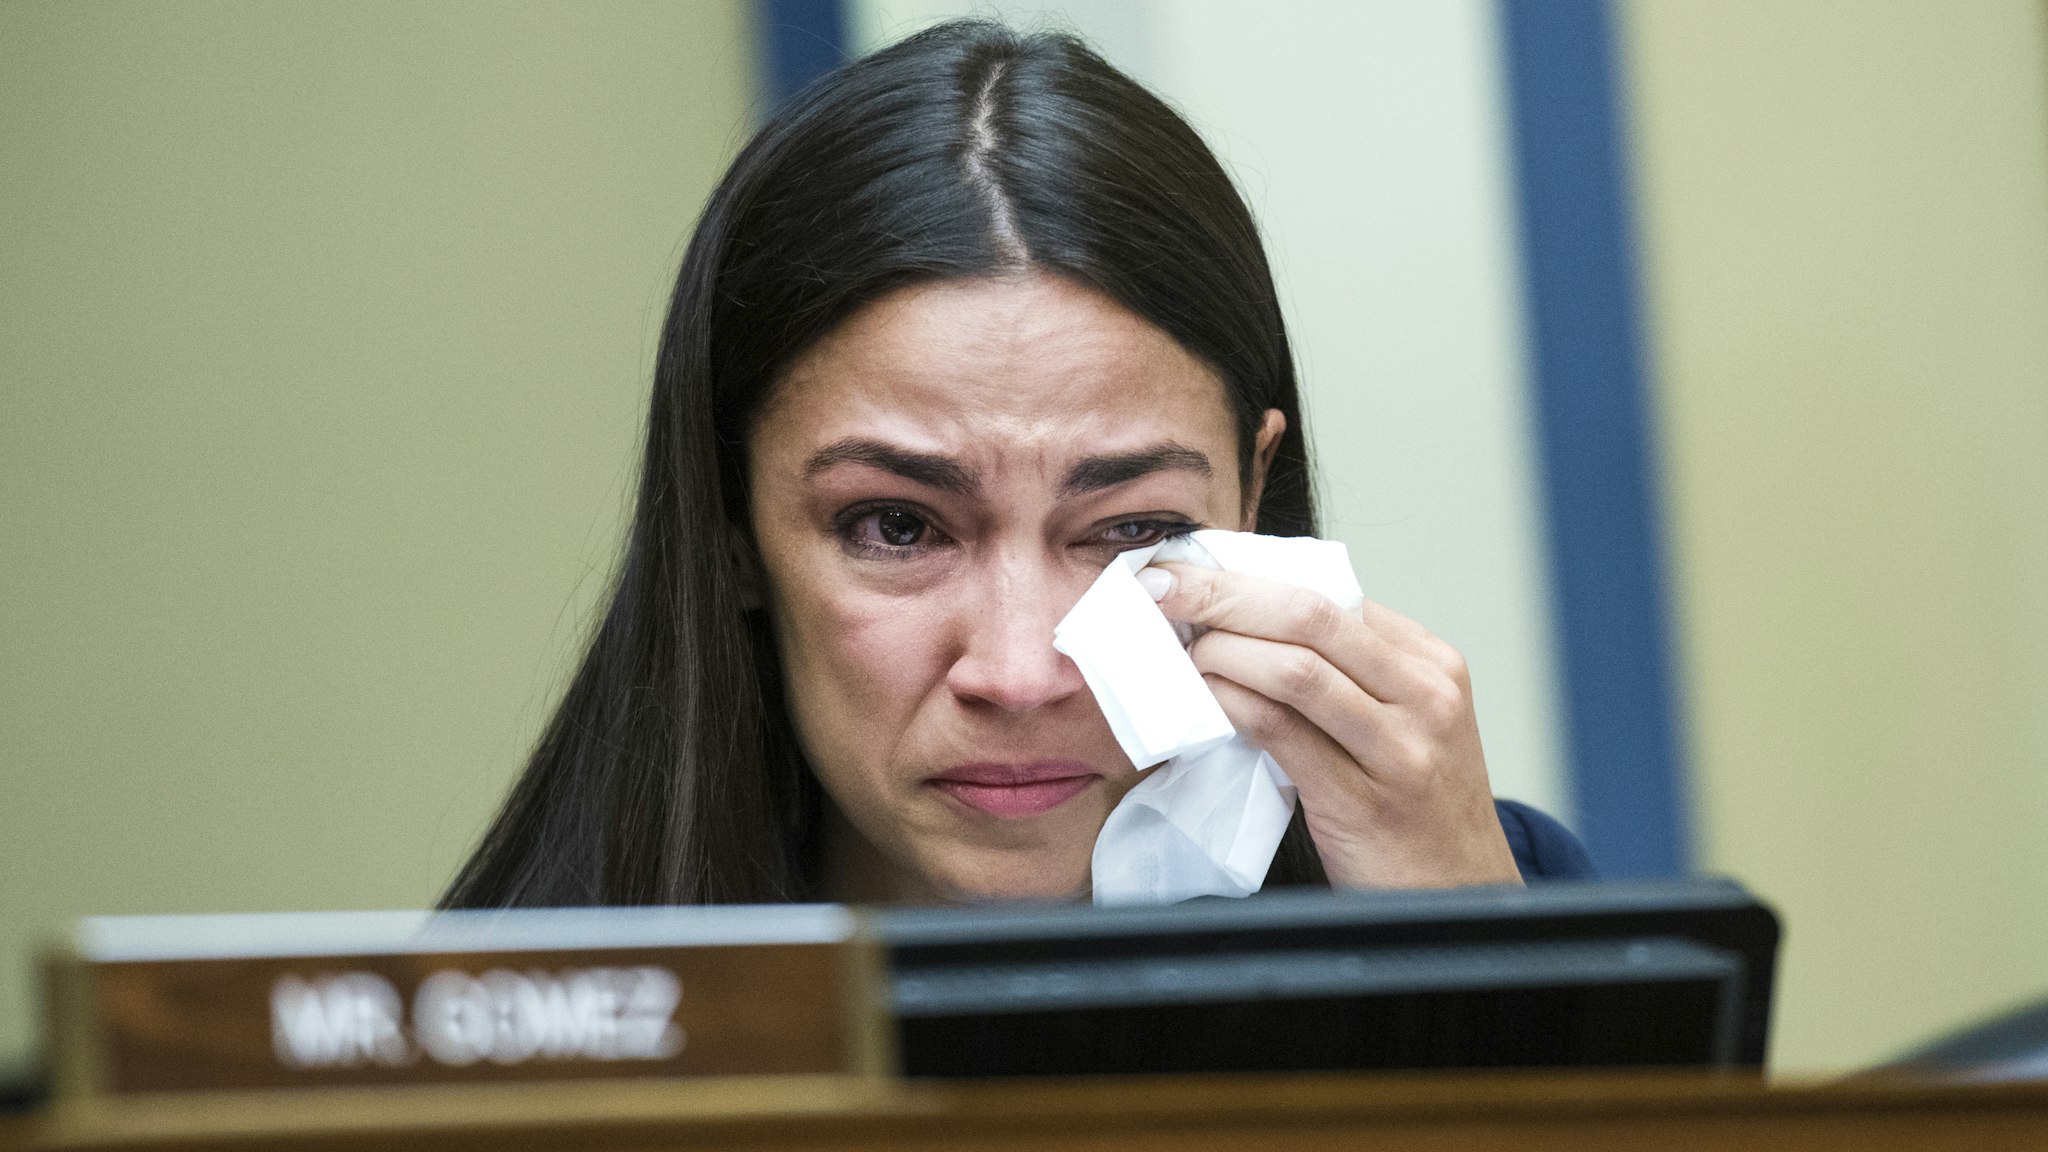 Rep. Alexandria Ocasio-Cortez, D-N.Y., listens to Yazmin Juárez, an migrant from Guatemala whose 19-month old daughter, Mariee, died after becoming sick at an Immigration and Customs Enforcement (ICE) detention facility, testify during a House Oversight and Reform Subcommittee on Civil Rights and Civil Liberties hearing in Rayburn Building titled "Kids in Cages: Inhumane Treatment at the Border," on Wednesday, July 10, 2019.